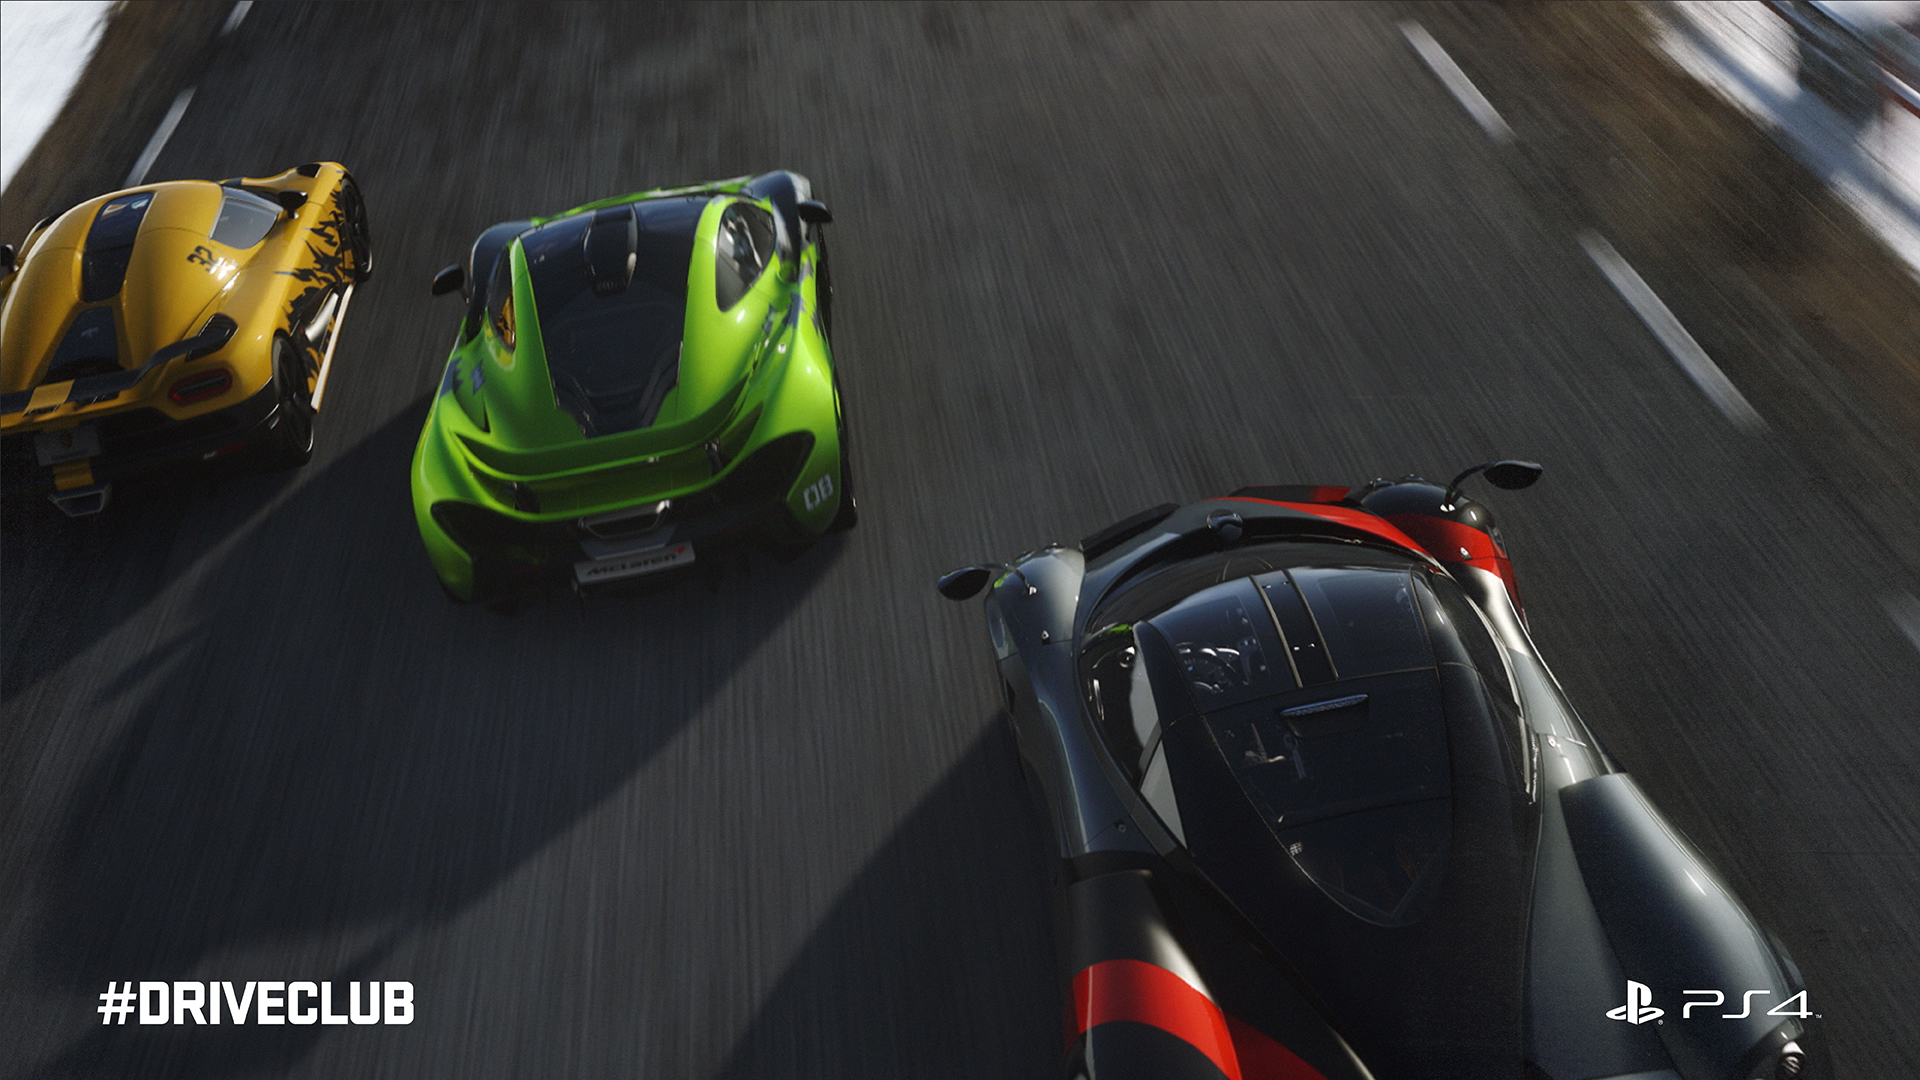 Video Game Driveclub HD Wallpaper | Background Image